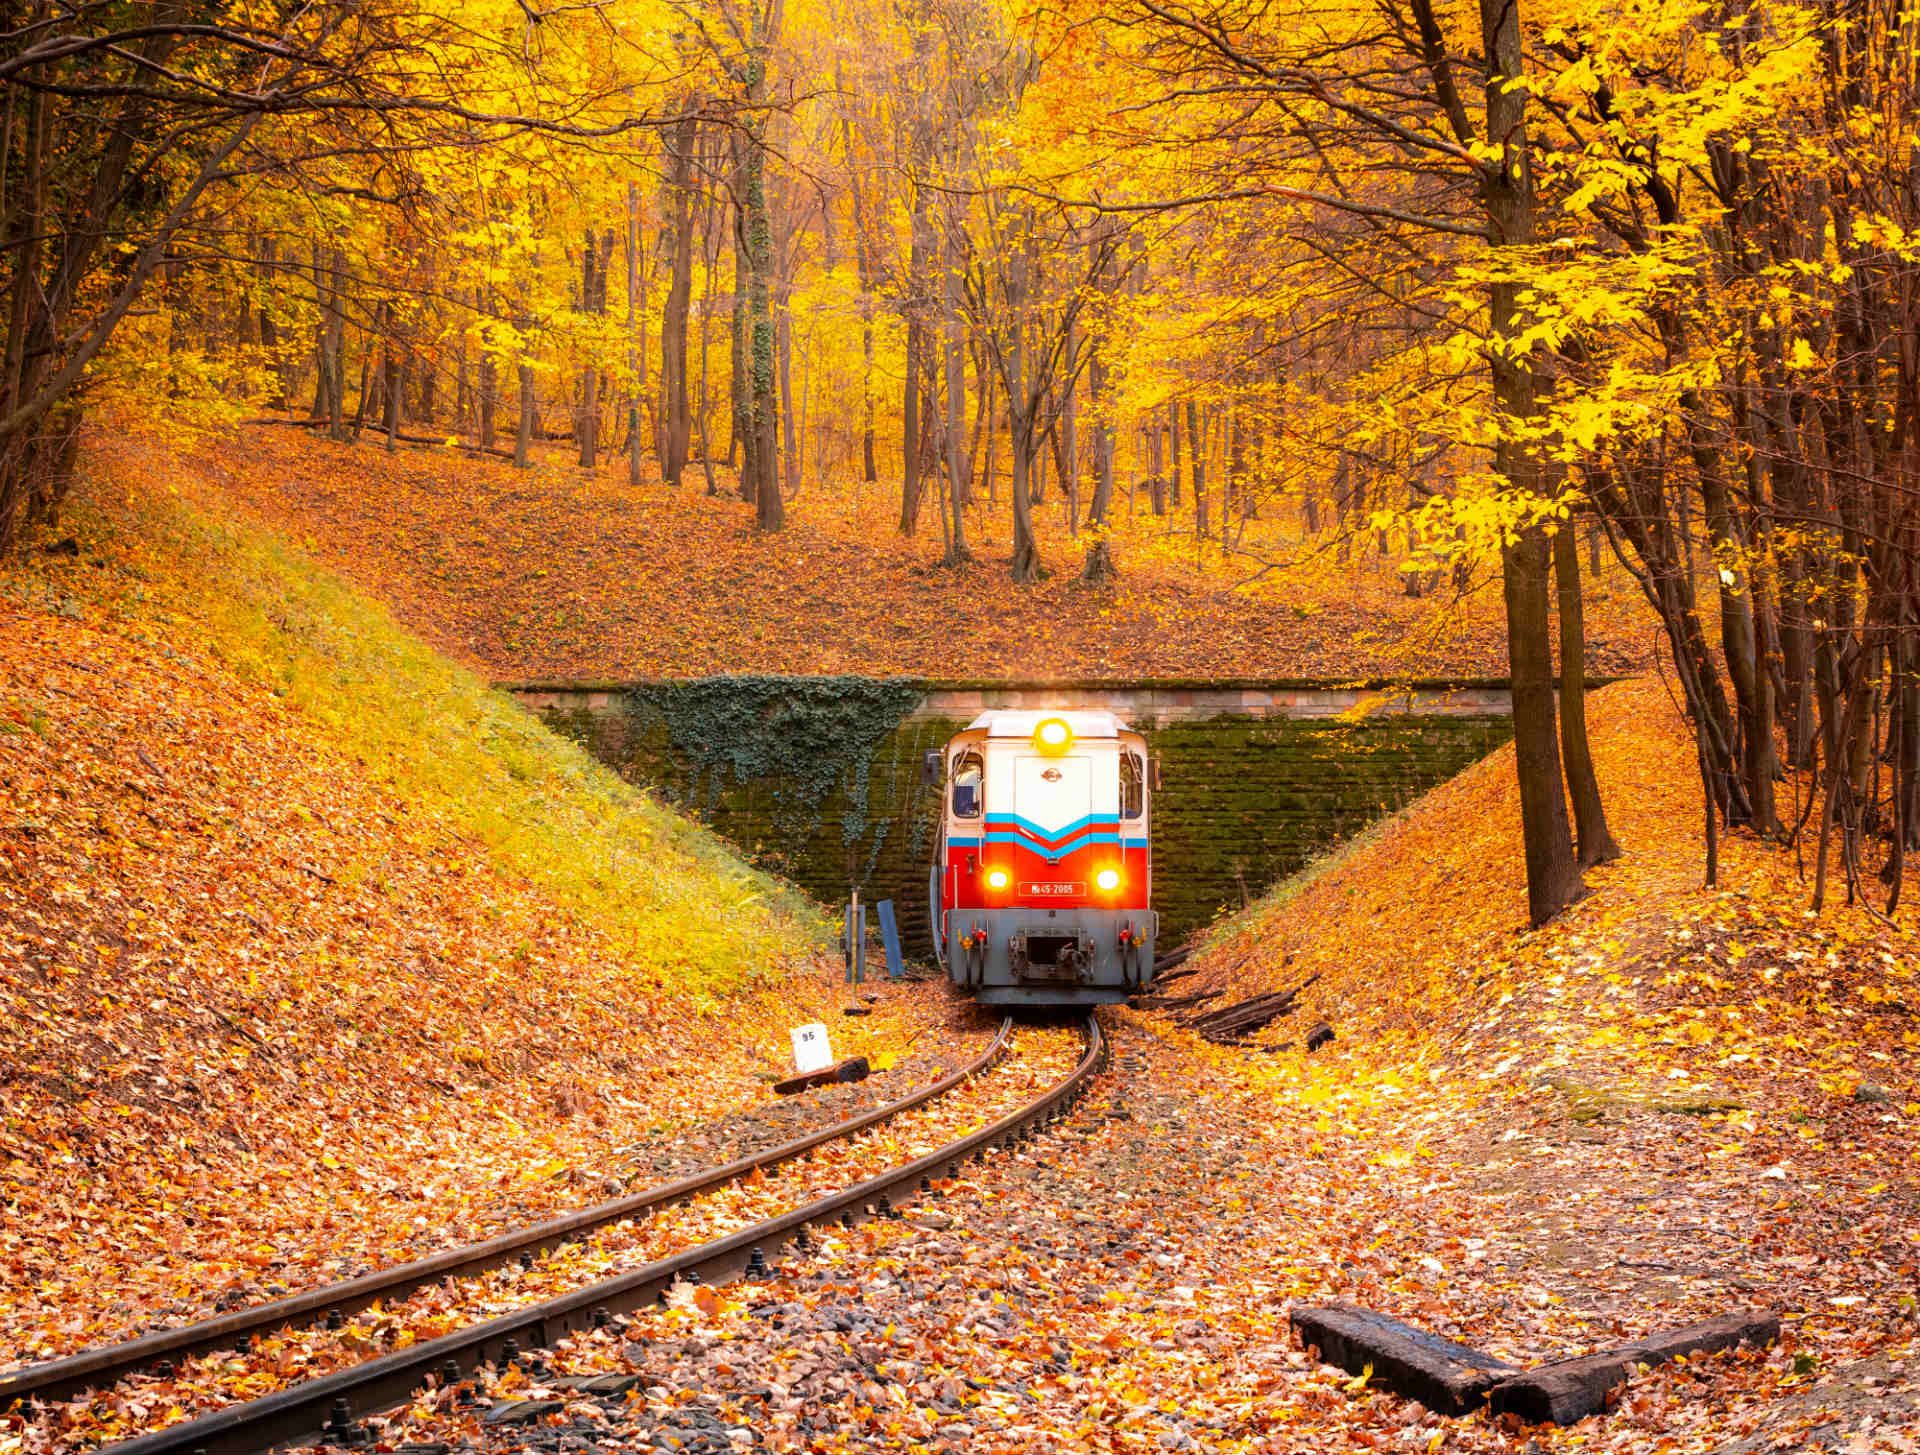 The Children’s Railway riding through the Buda Hills in the fall